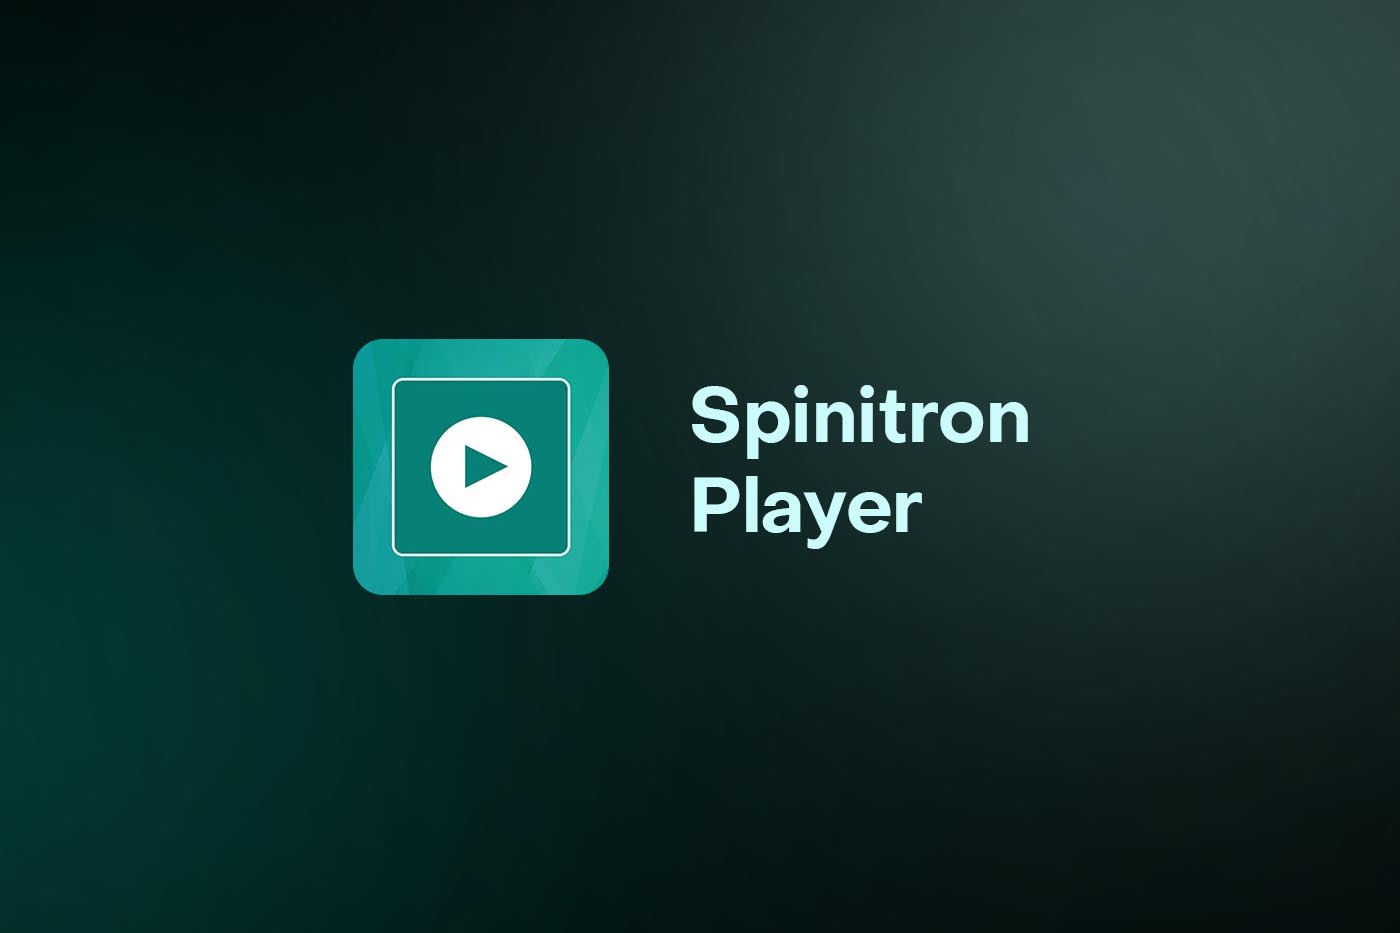 Logo for Spinitron Player with a dark green and black gradient background. The logo consists of a turquoise square with rounded corners and a white play button in the center. Text to the right of the square reads "Spinitron Player.